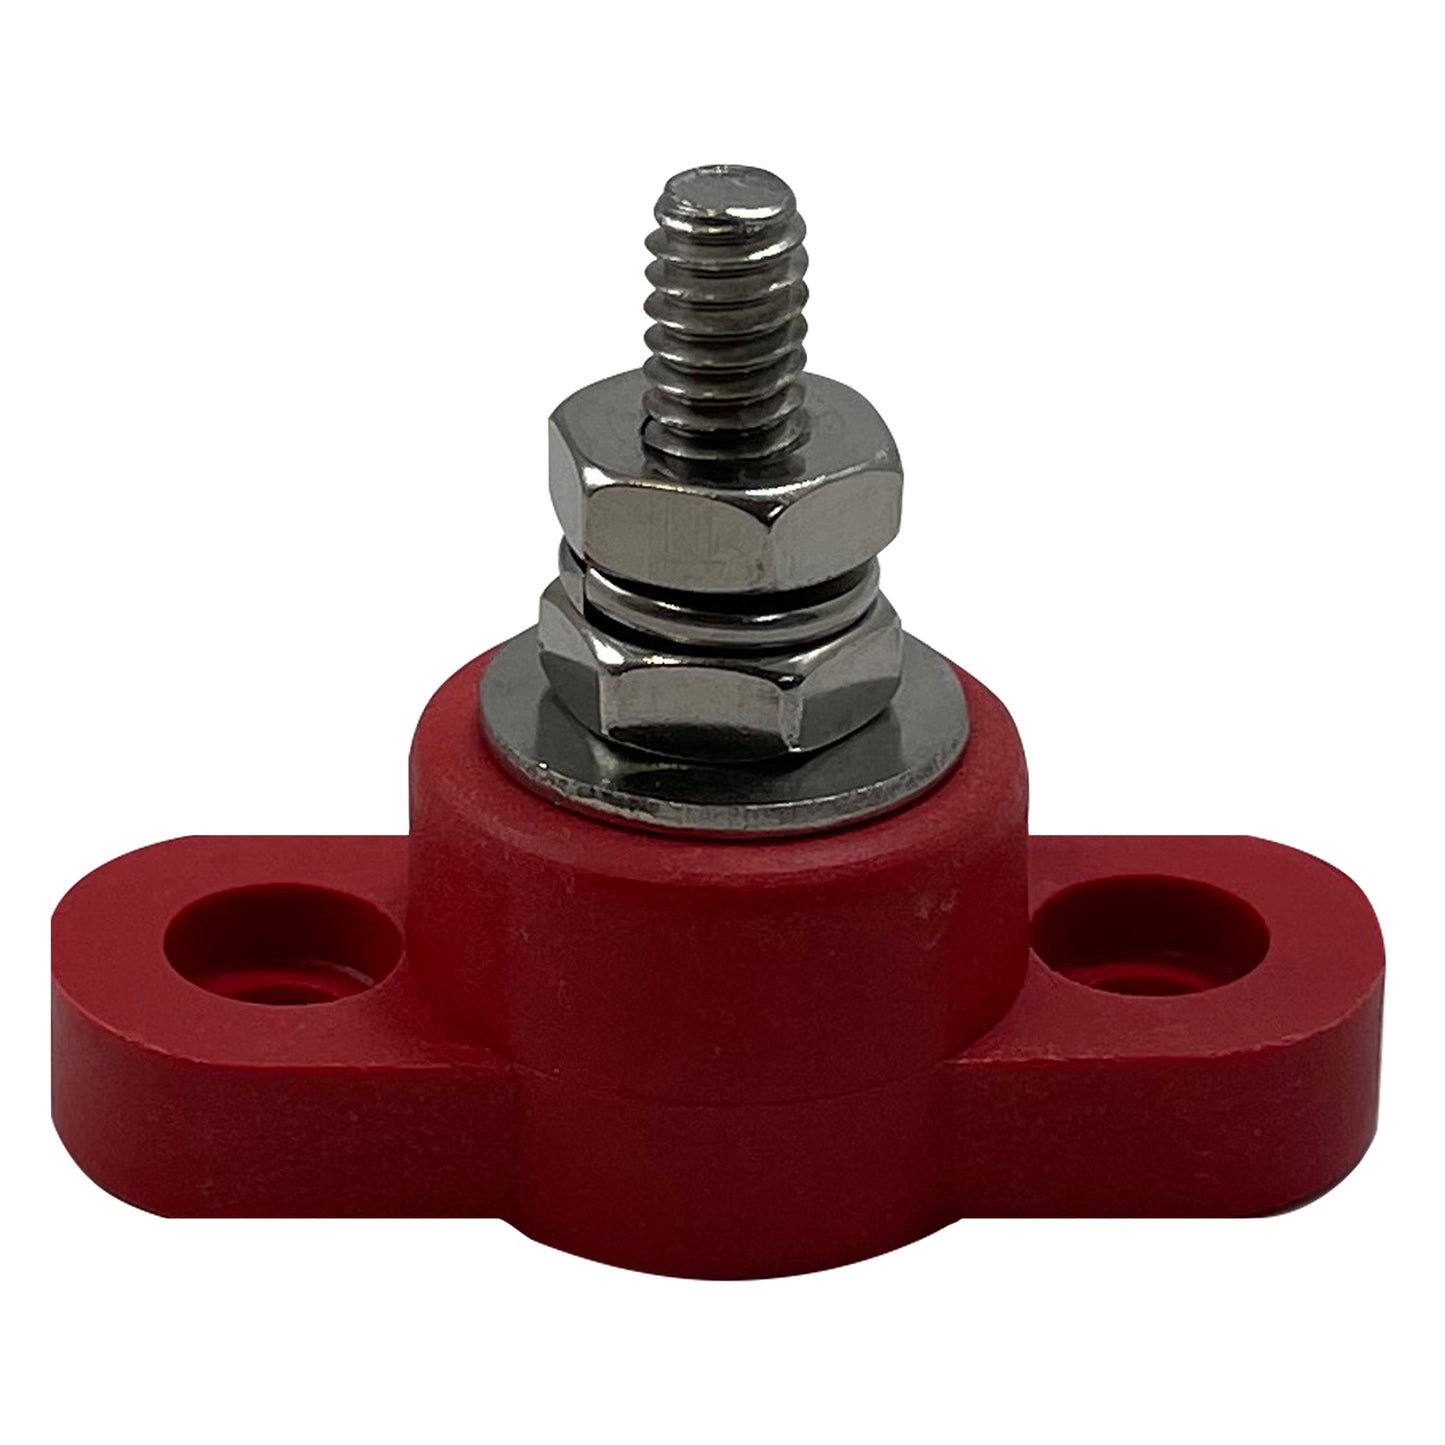 Small Base 1/4" Single Point Power Post - Red